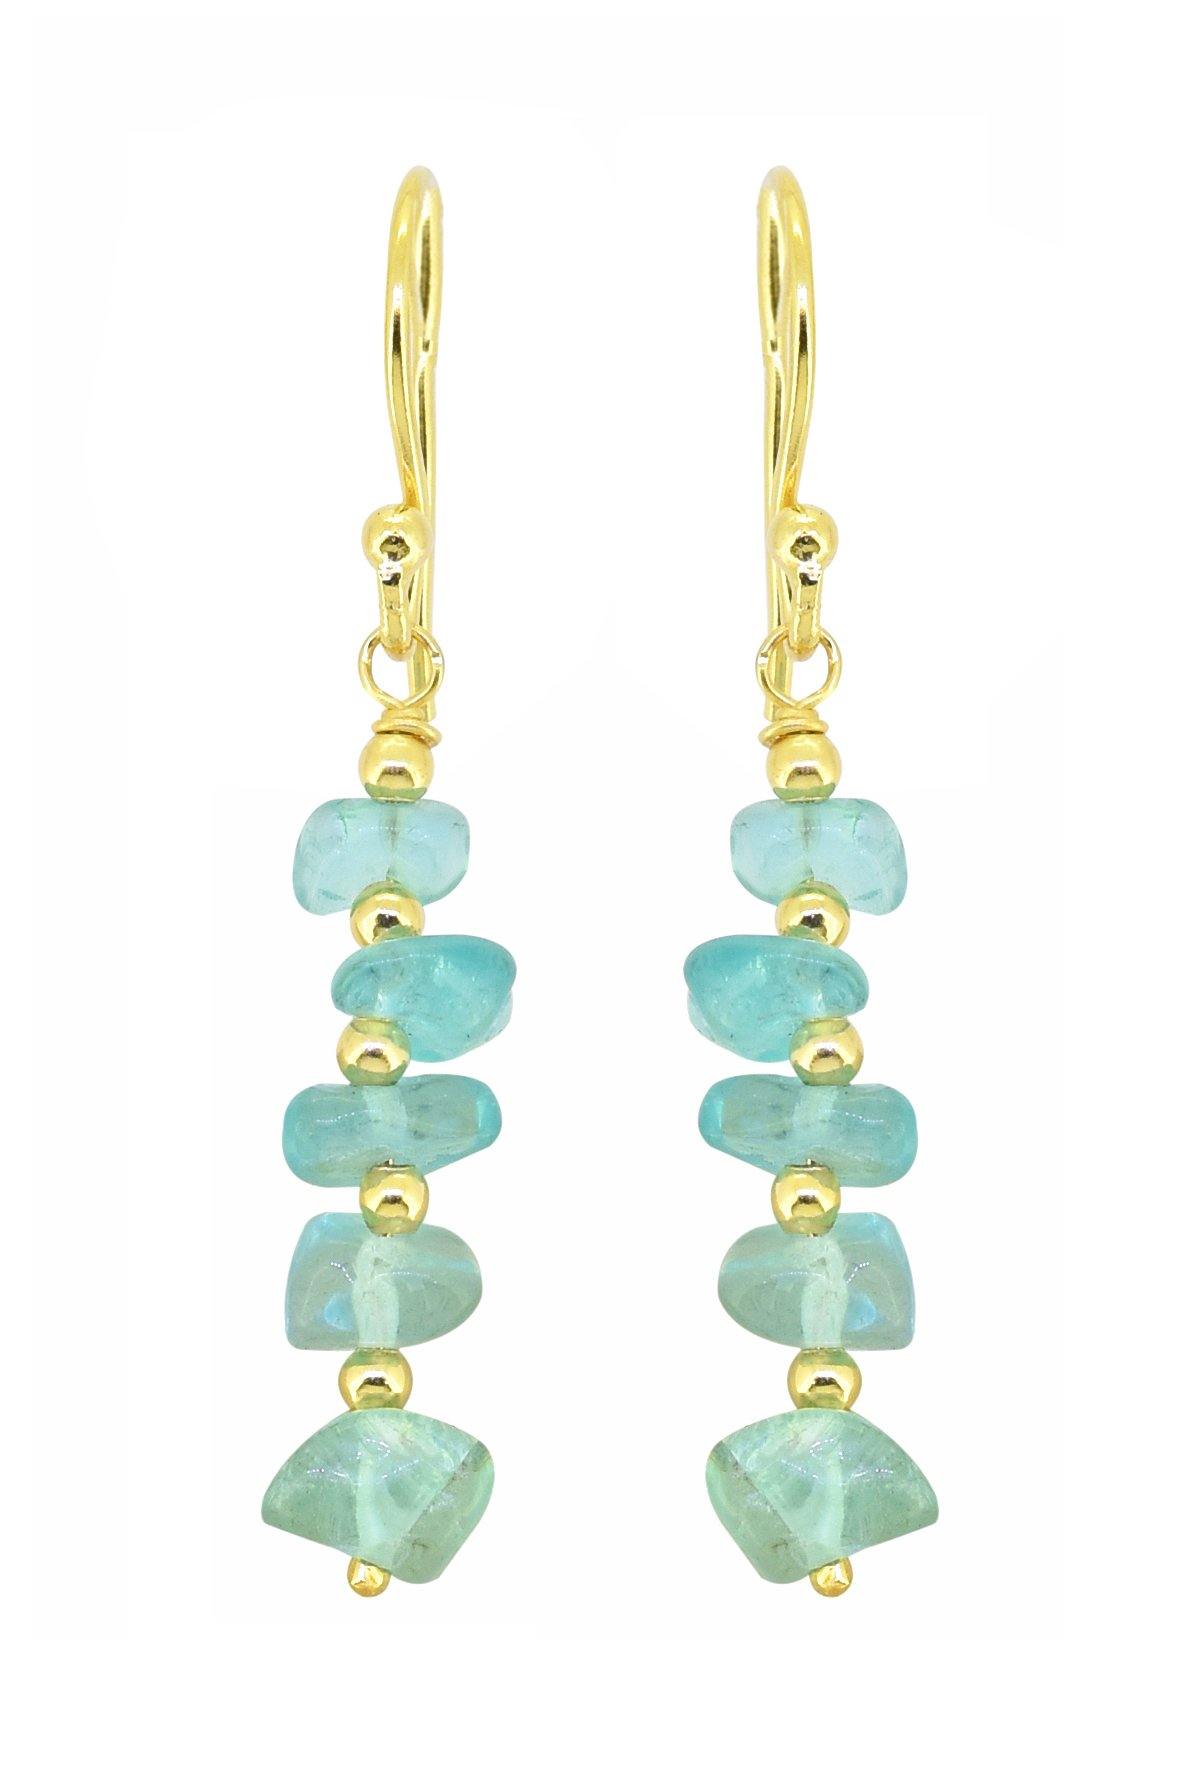 Apatite Solid 925 Silver Gold Plated Dangle Earrings Jewelry - YoTreasure